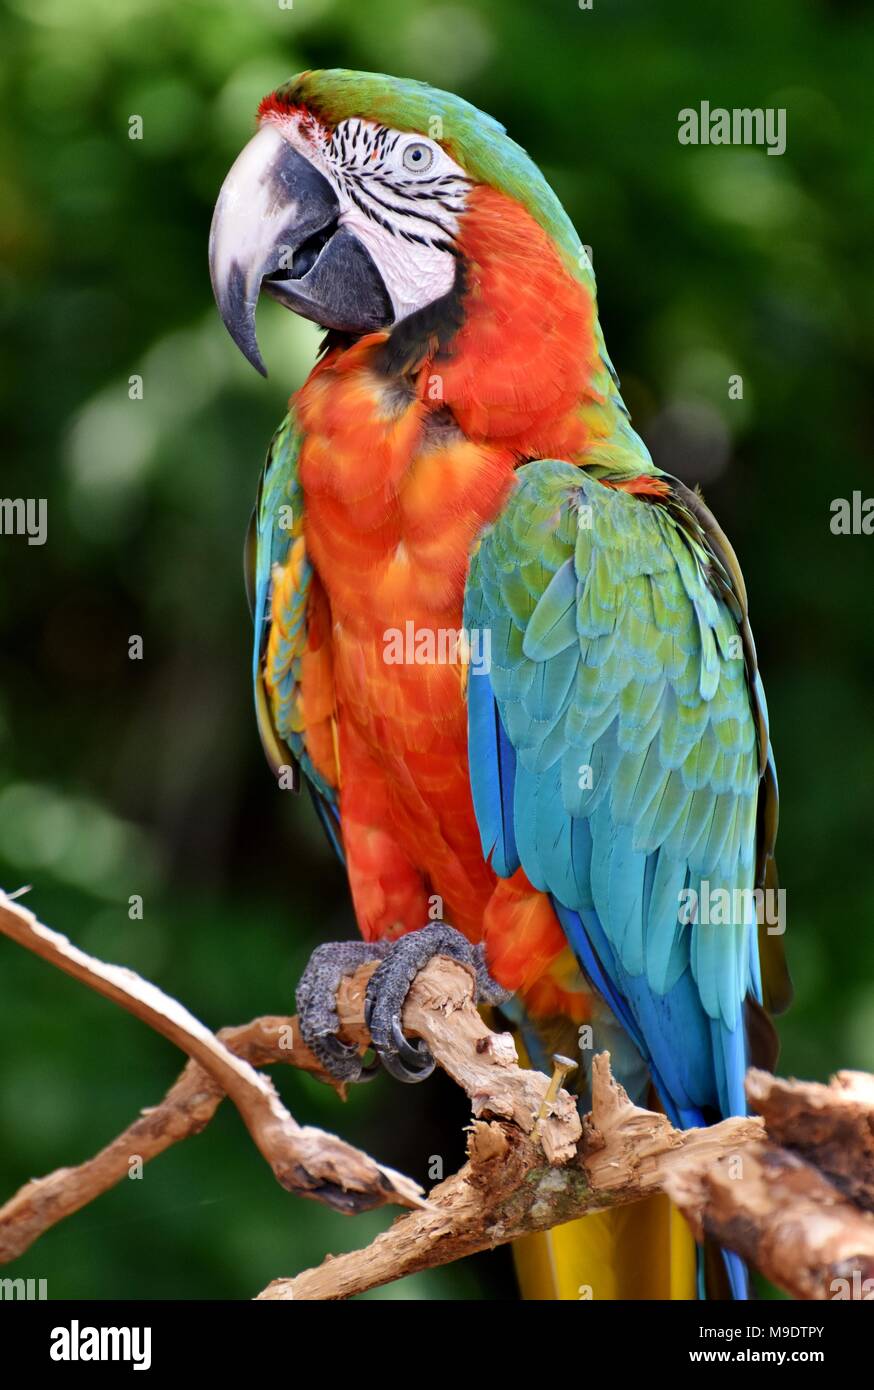 The Harlequin Macaw is a first generation hybrid macaw. It is a cross between a Blue and Gold Macaw (Ara ararauna) and a Green-winged Macaw Stock Photo